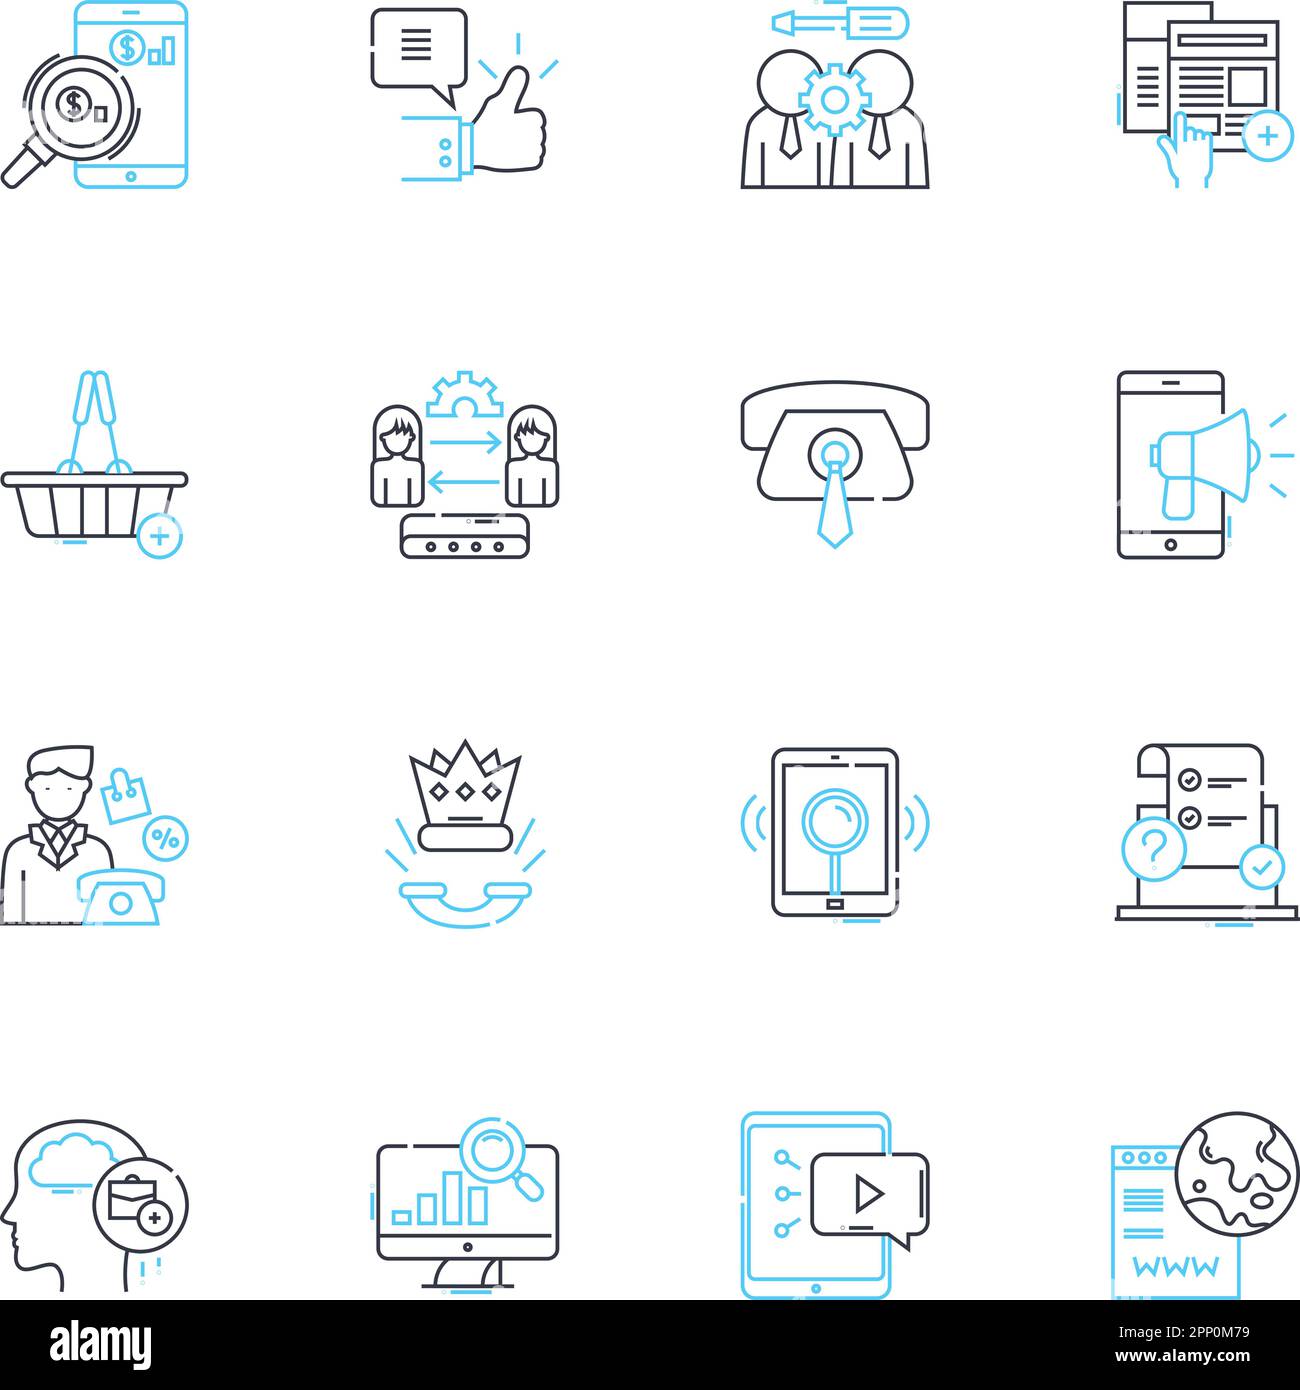 Verbal exchange linear icons set. Dialogue, Conversation, Debating, Communication, Interacting, Expression, Talk line vector and concept signs Stock Vector